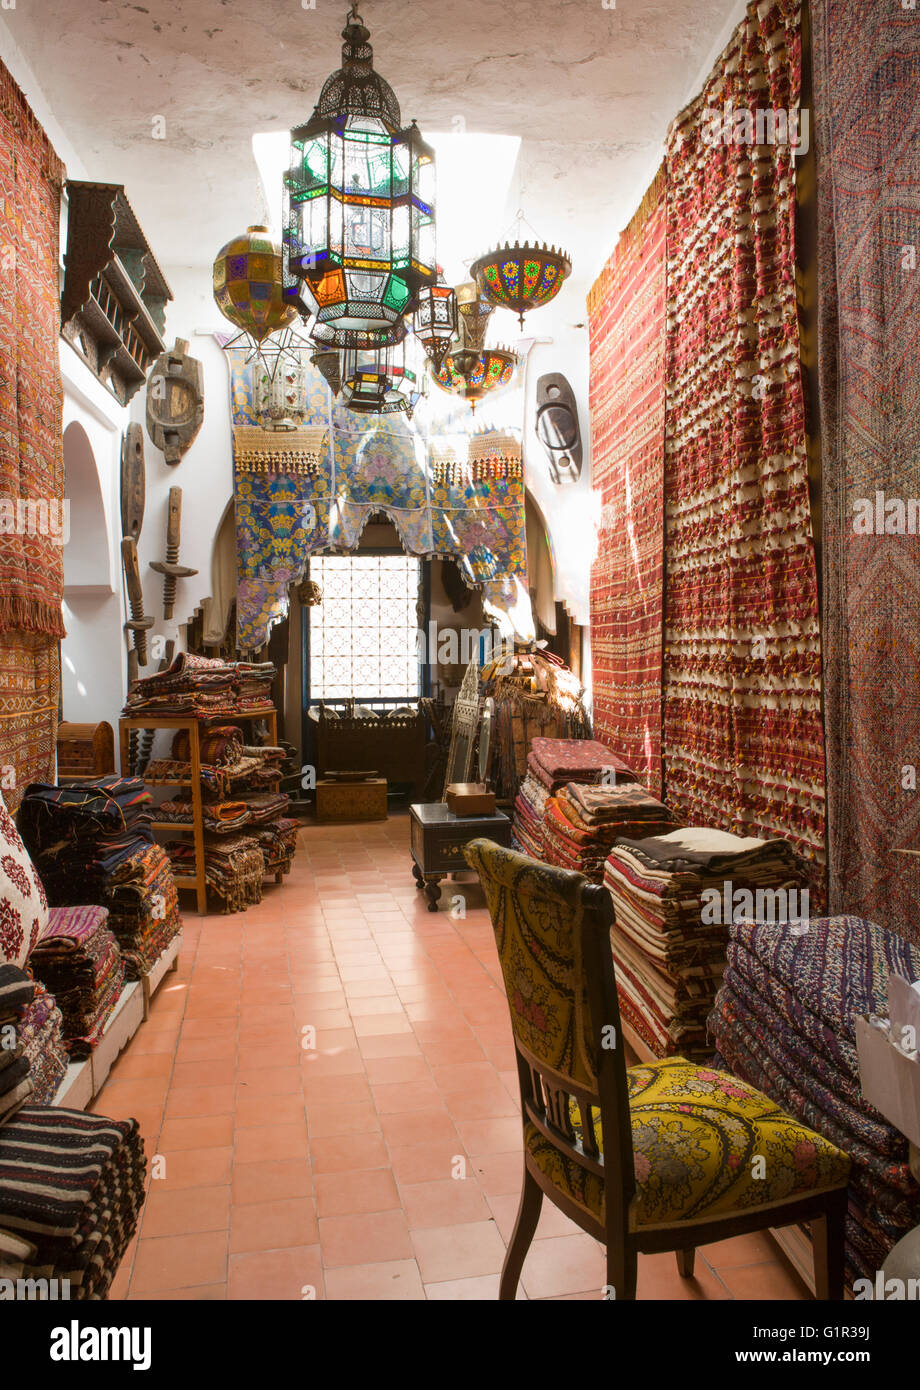 Antiques dealer and souvenirs shop indoors, Tangier, Morocco Stock Photo